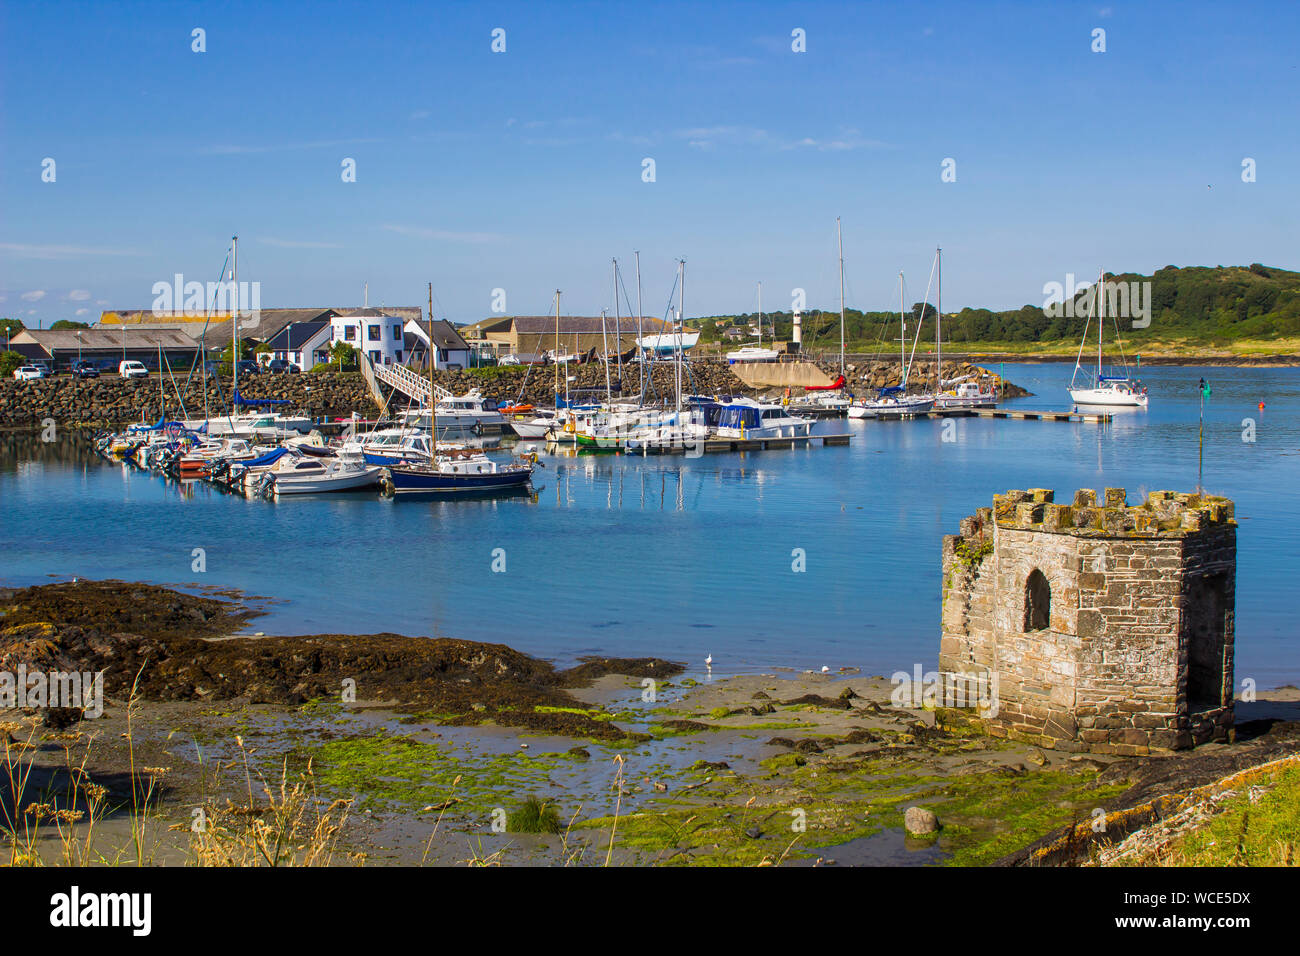 8 august 2019 A small medieval stone tower overlooking the marina and harbour at Ardglass County Down northern Ireland on a hot day in summer Stock Photo